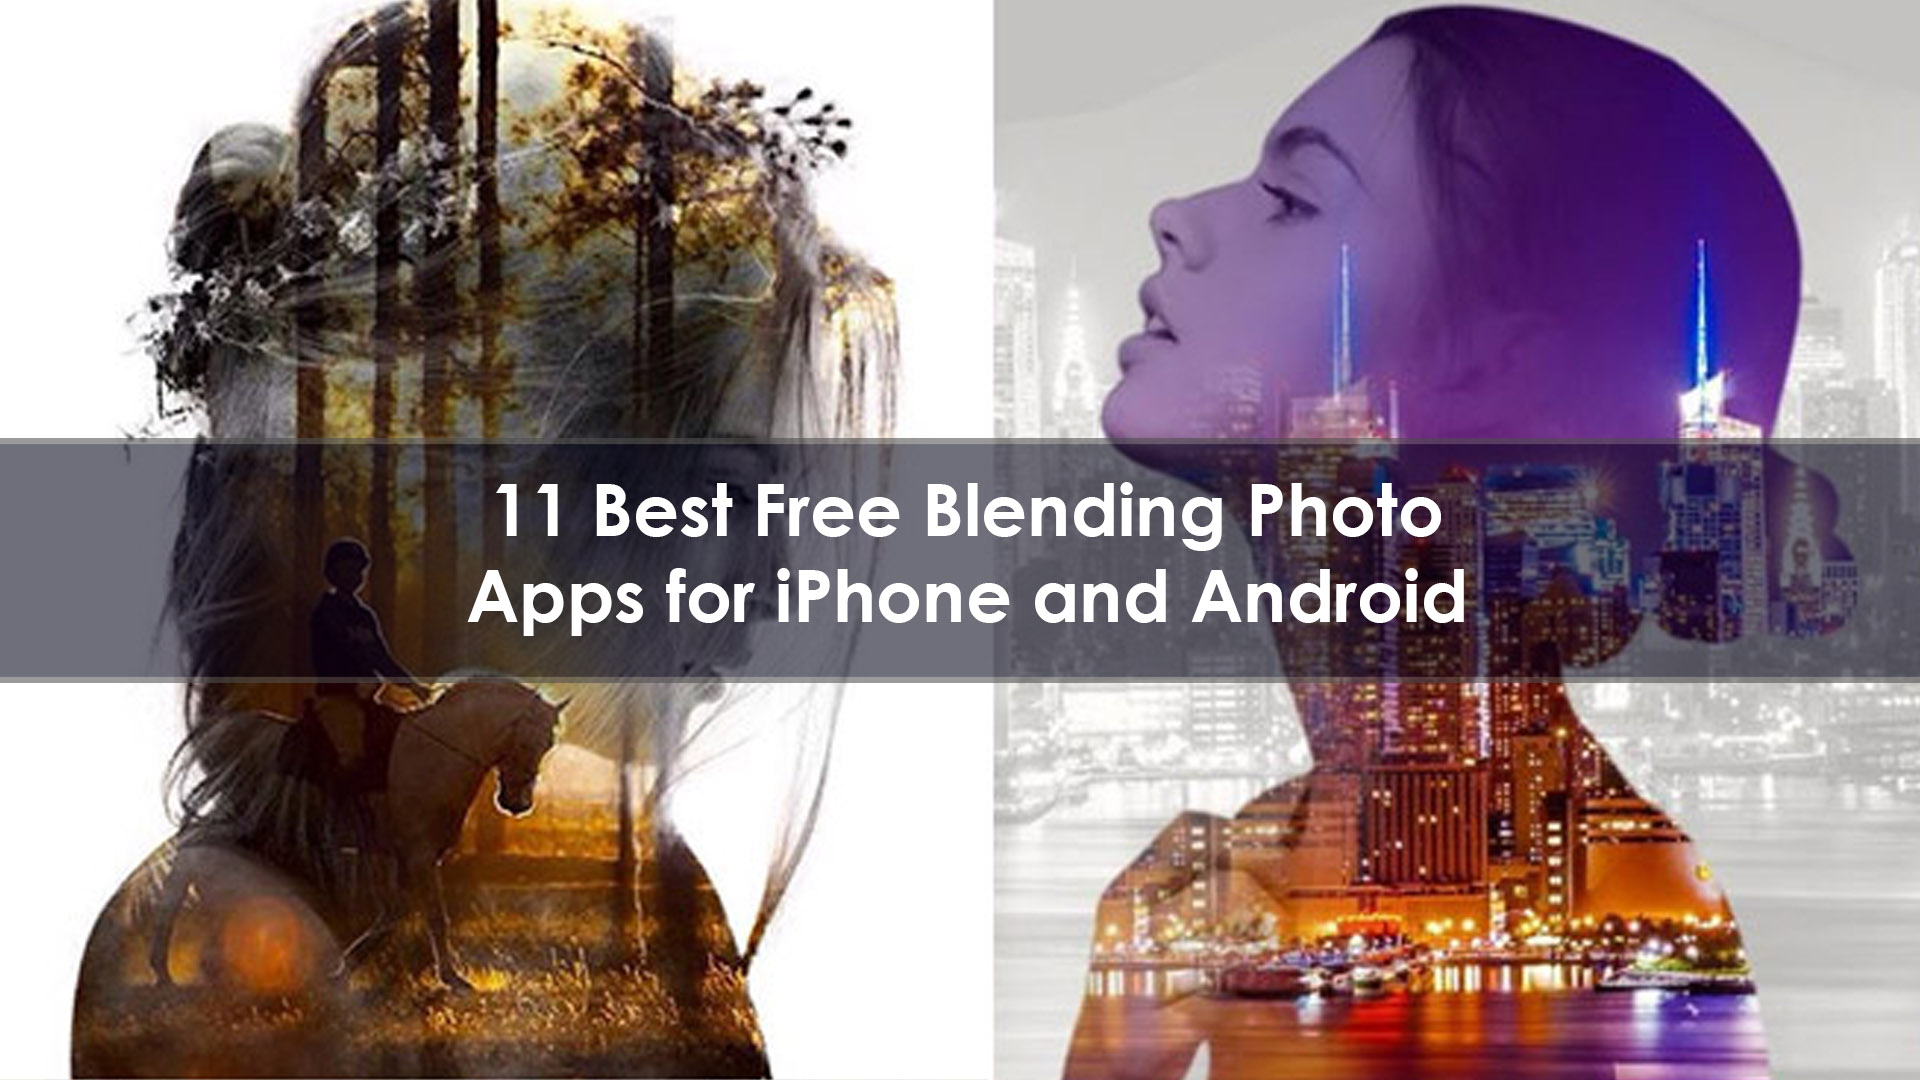 11 Best Free Blending Photo Apps for iPhone and Android